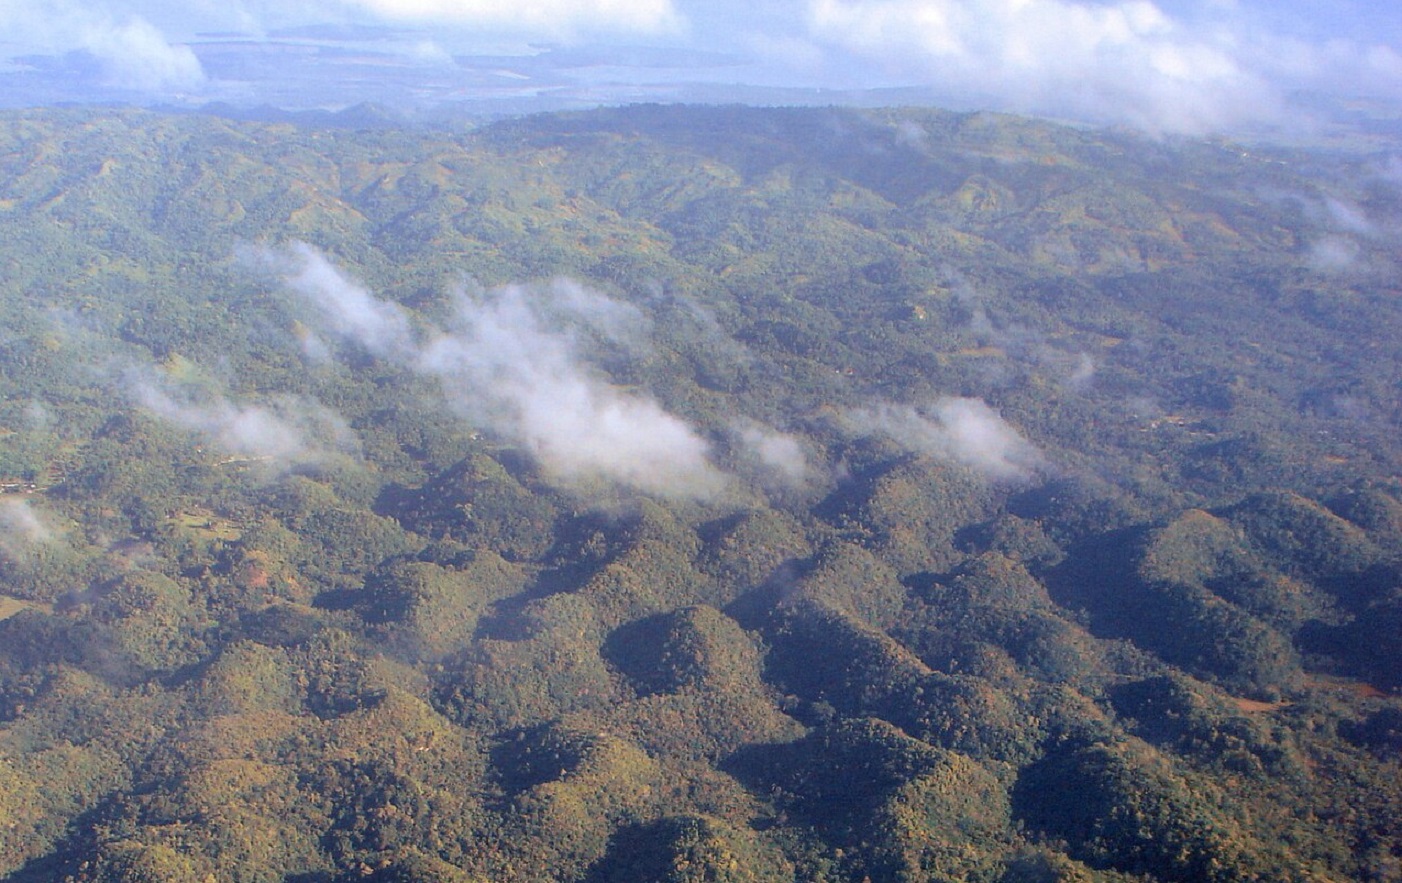 <p>While the hills themselves are covered in grass and ferns, the flat lands between the hills are used for growing important crops like rice. In recent years, though, these important crops and the hills themselves have been threatened by increasing quarrying activity in the area.</p>